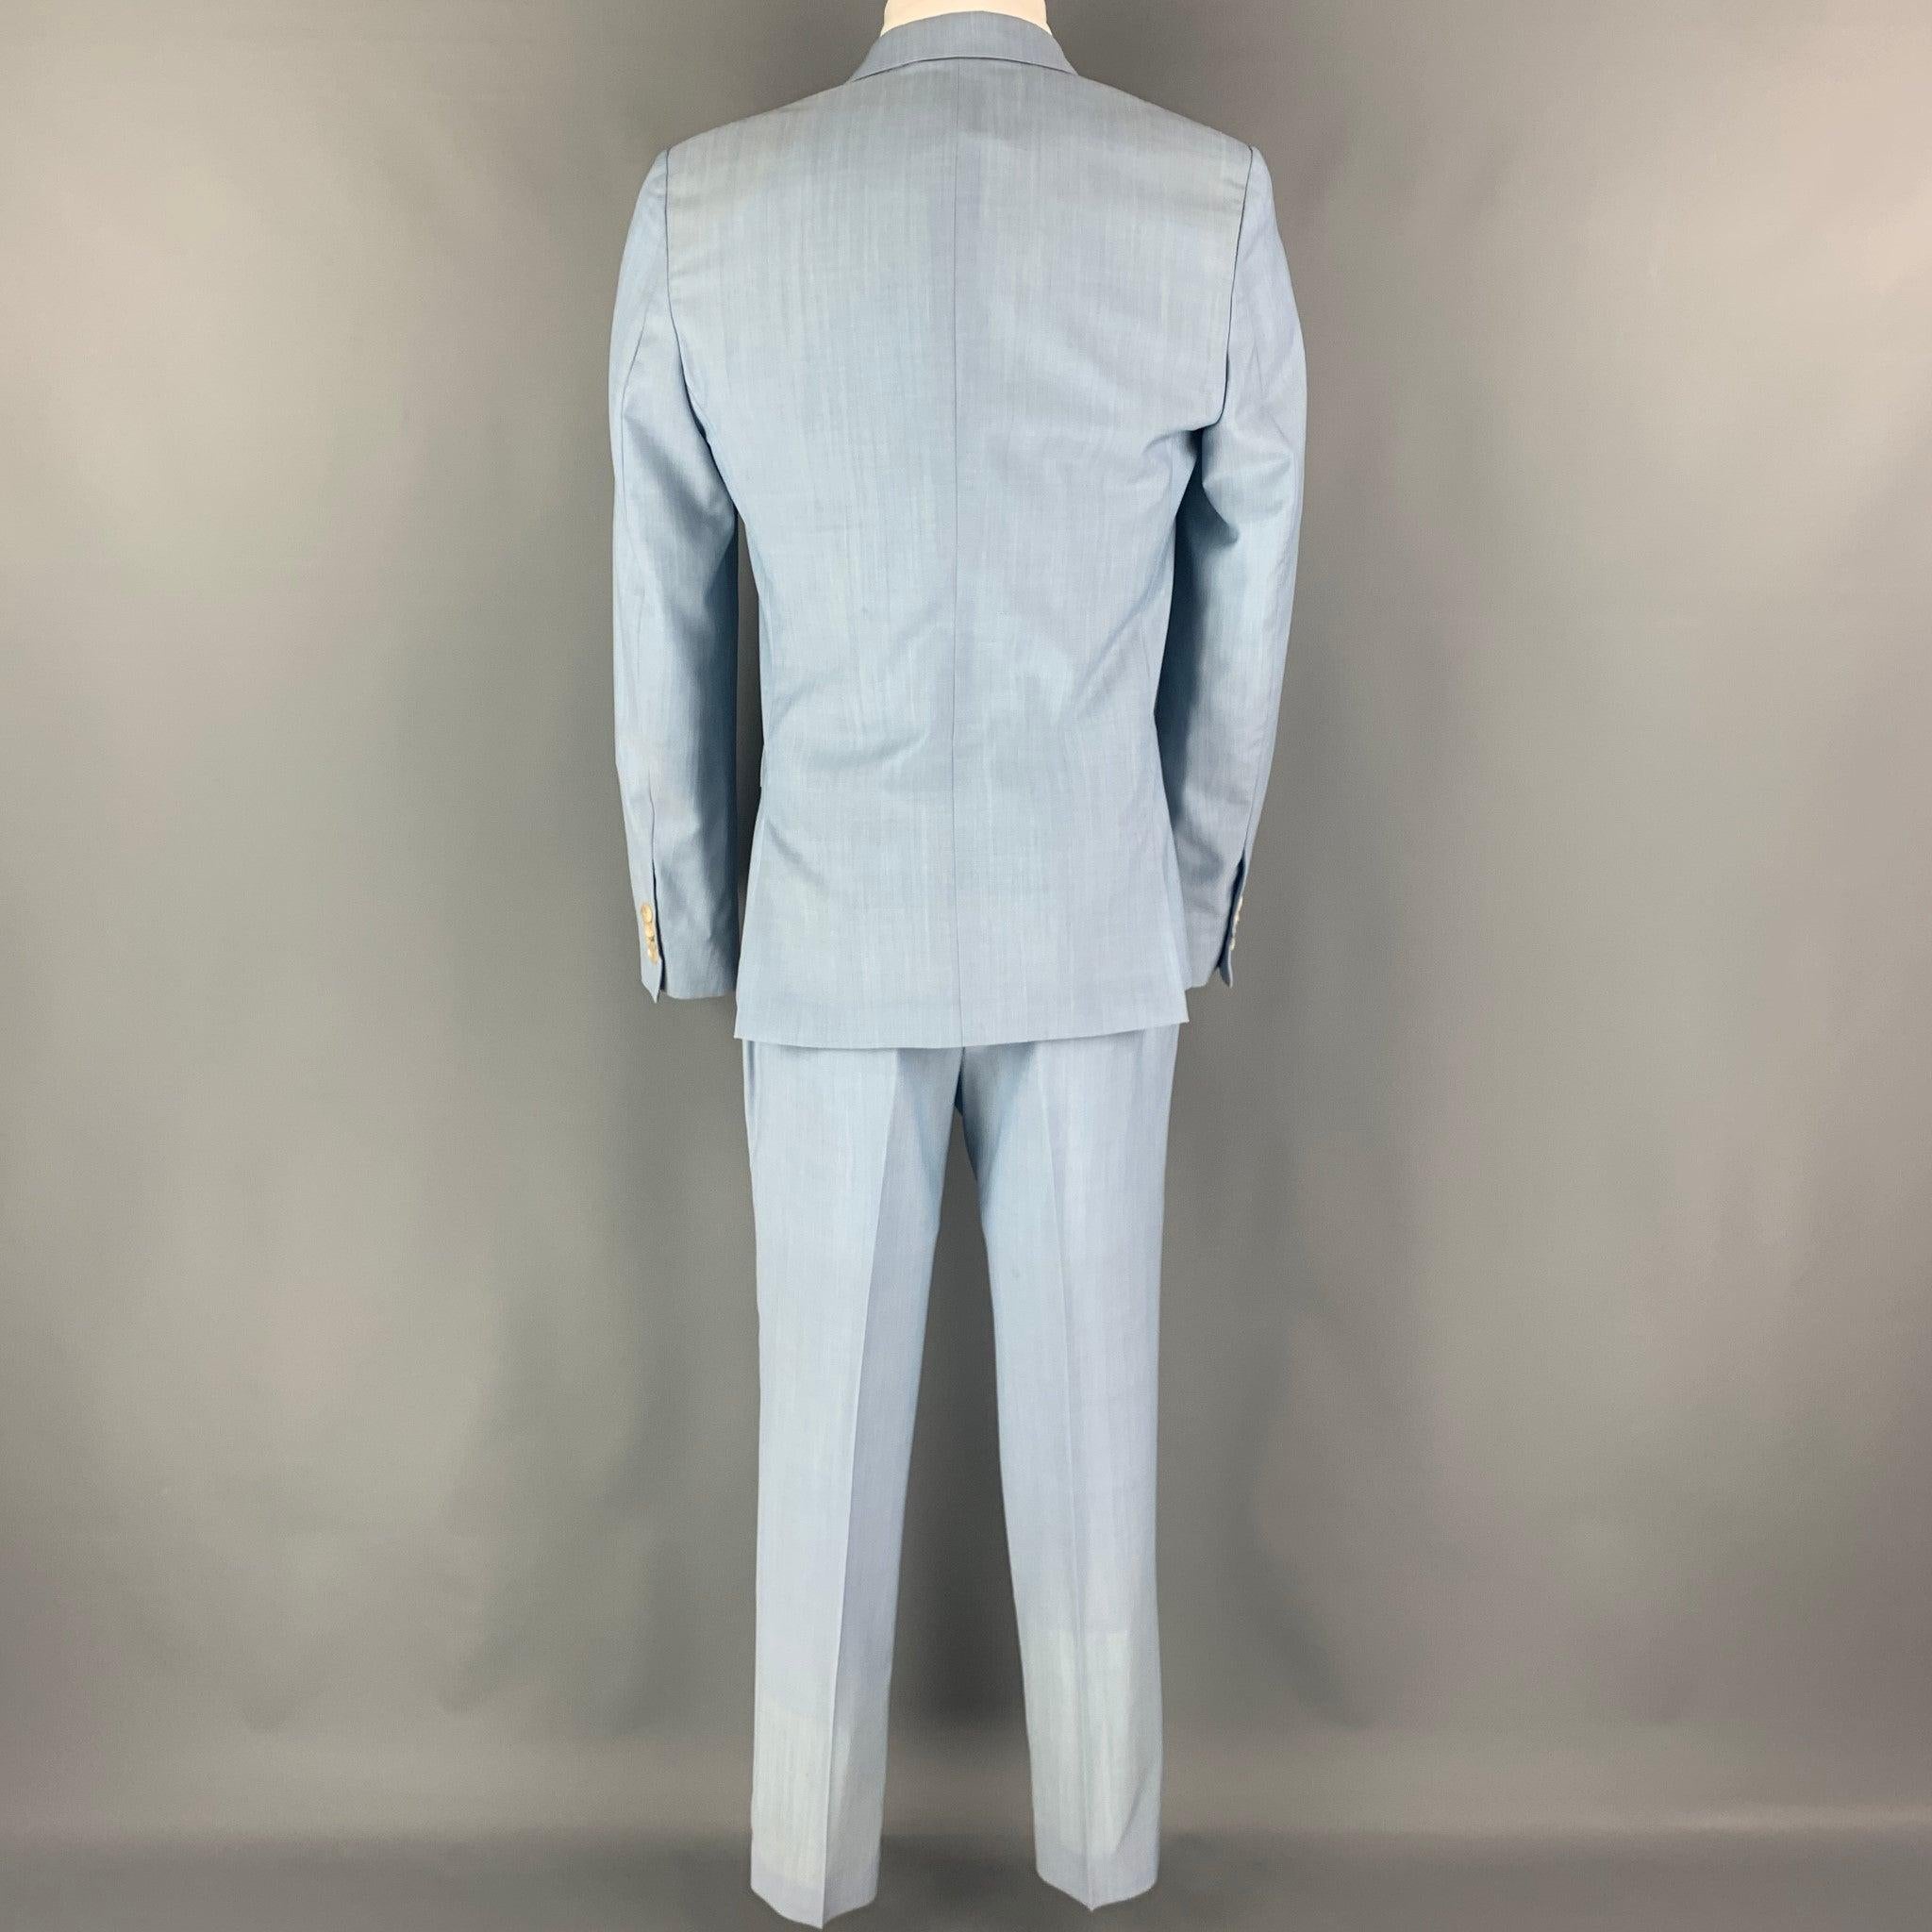 MARC JACOBS Size 38 Blue Light Blue Wool Notch Lapel Suit In Excellent Condition For Sale In San Francisco, CA